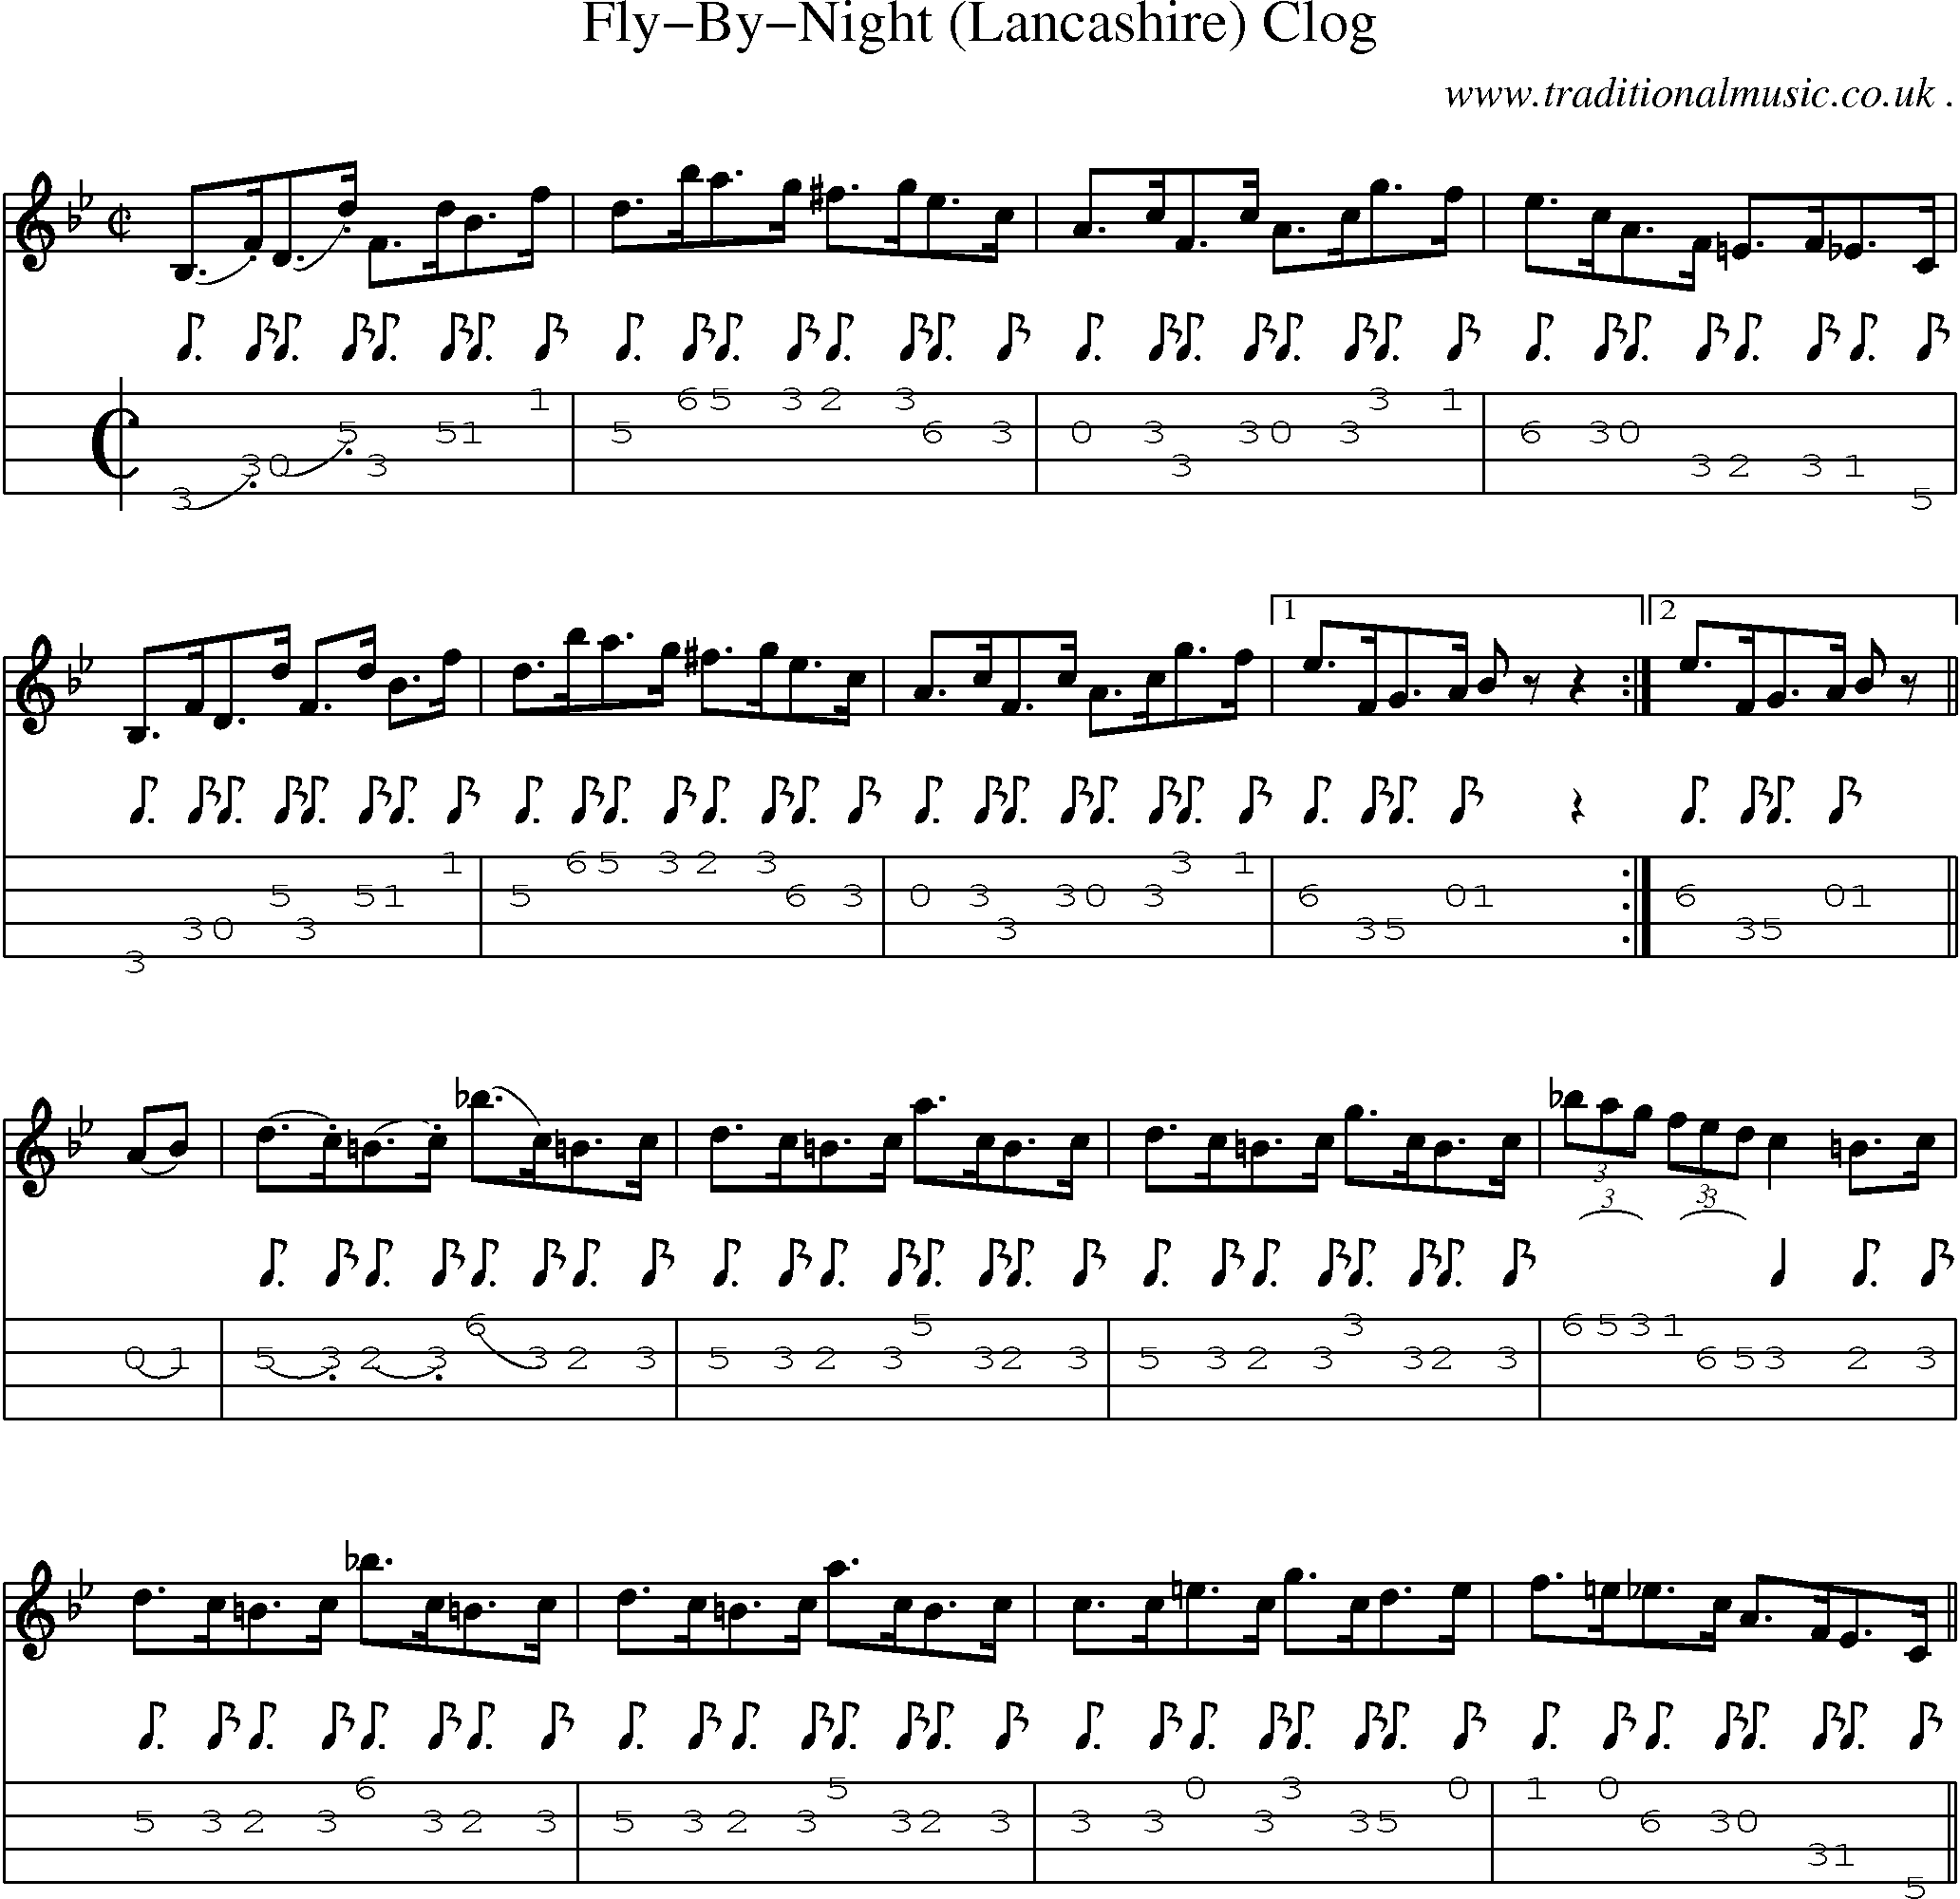 Sheet-Music and Mandolin Tabs for Fly-by-night (lancashire) Clog